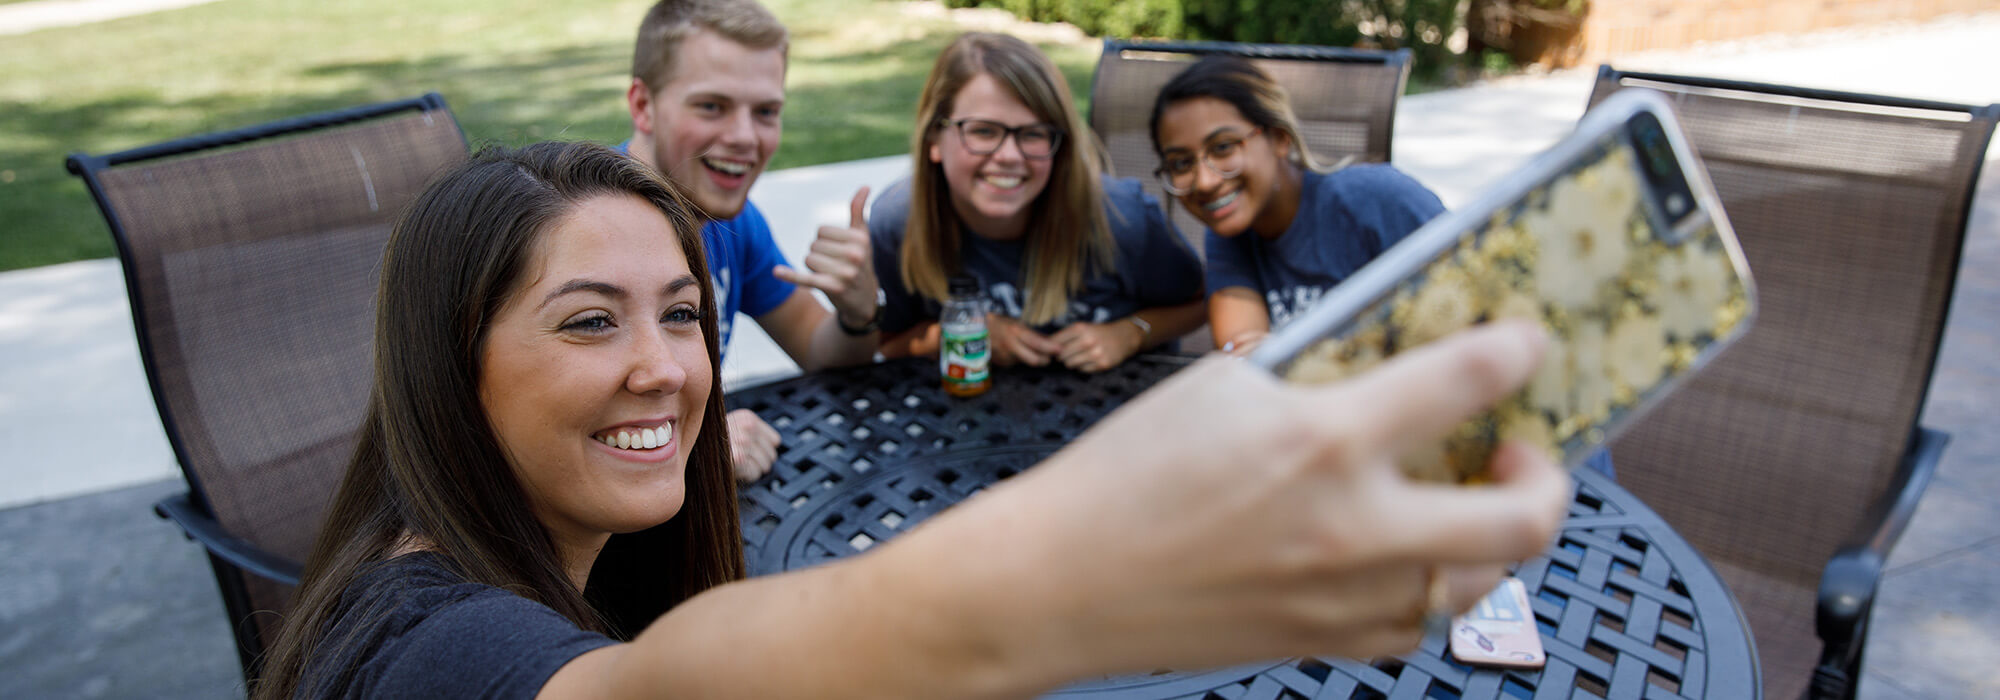 students taking a selfie and laughing